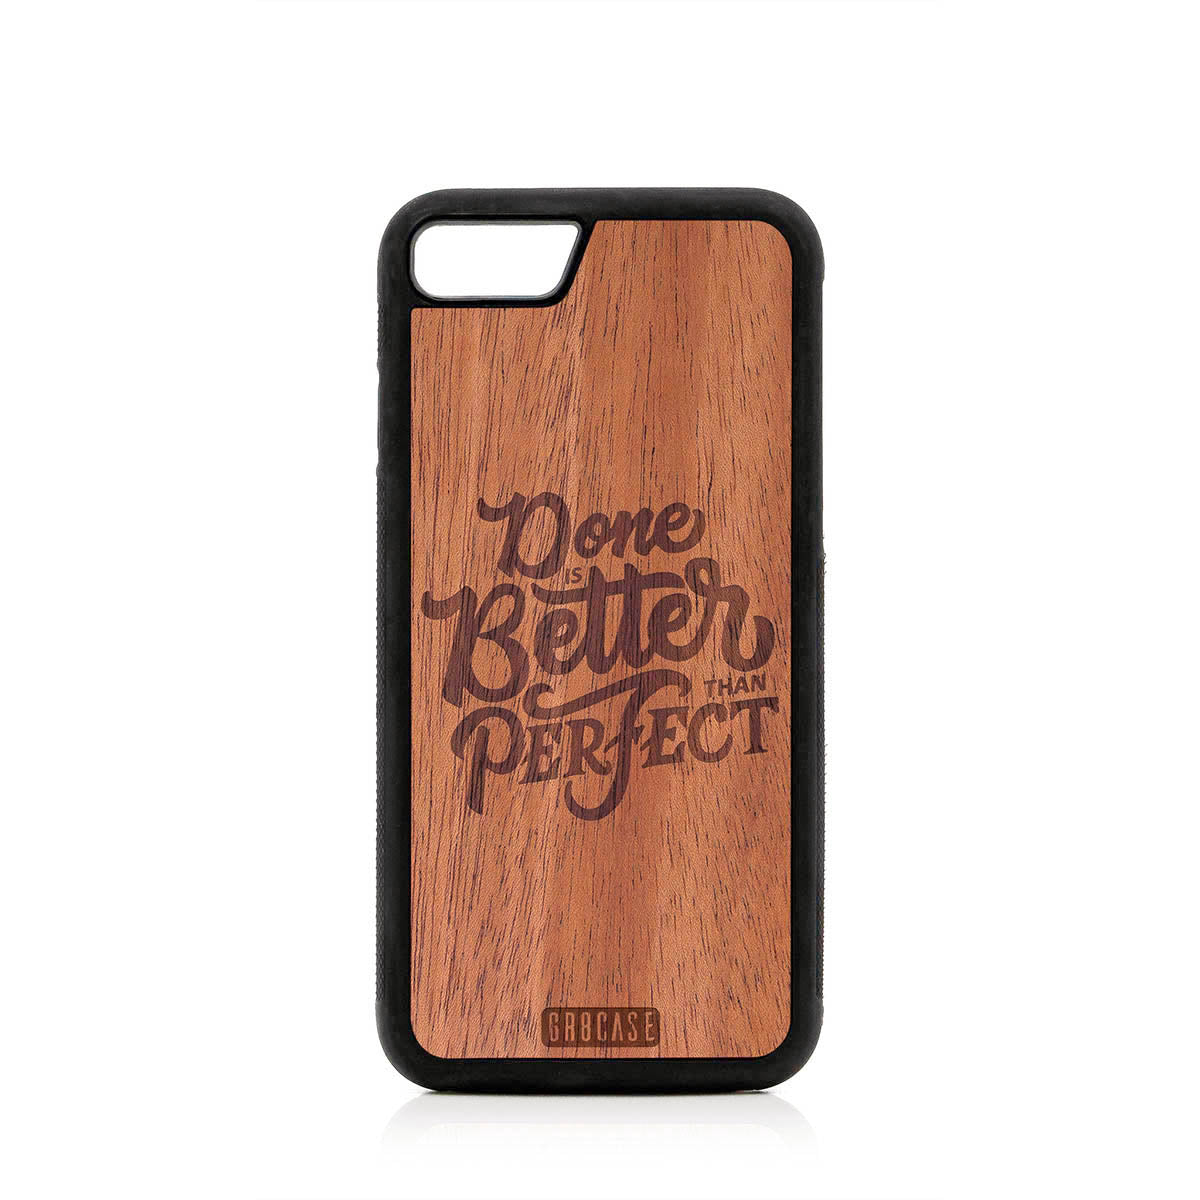 Done Is Better Than Perfect Design Wood Case For iPhone SE 2020 by GR8CASE